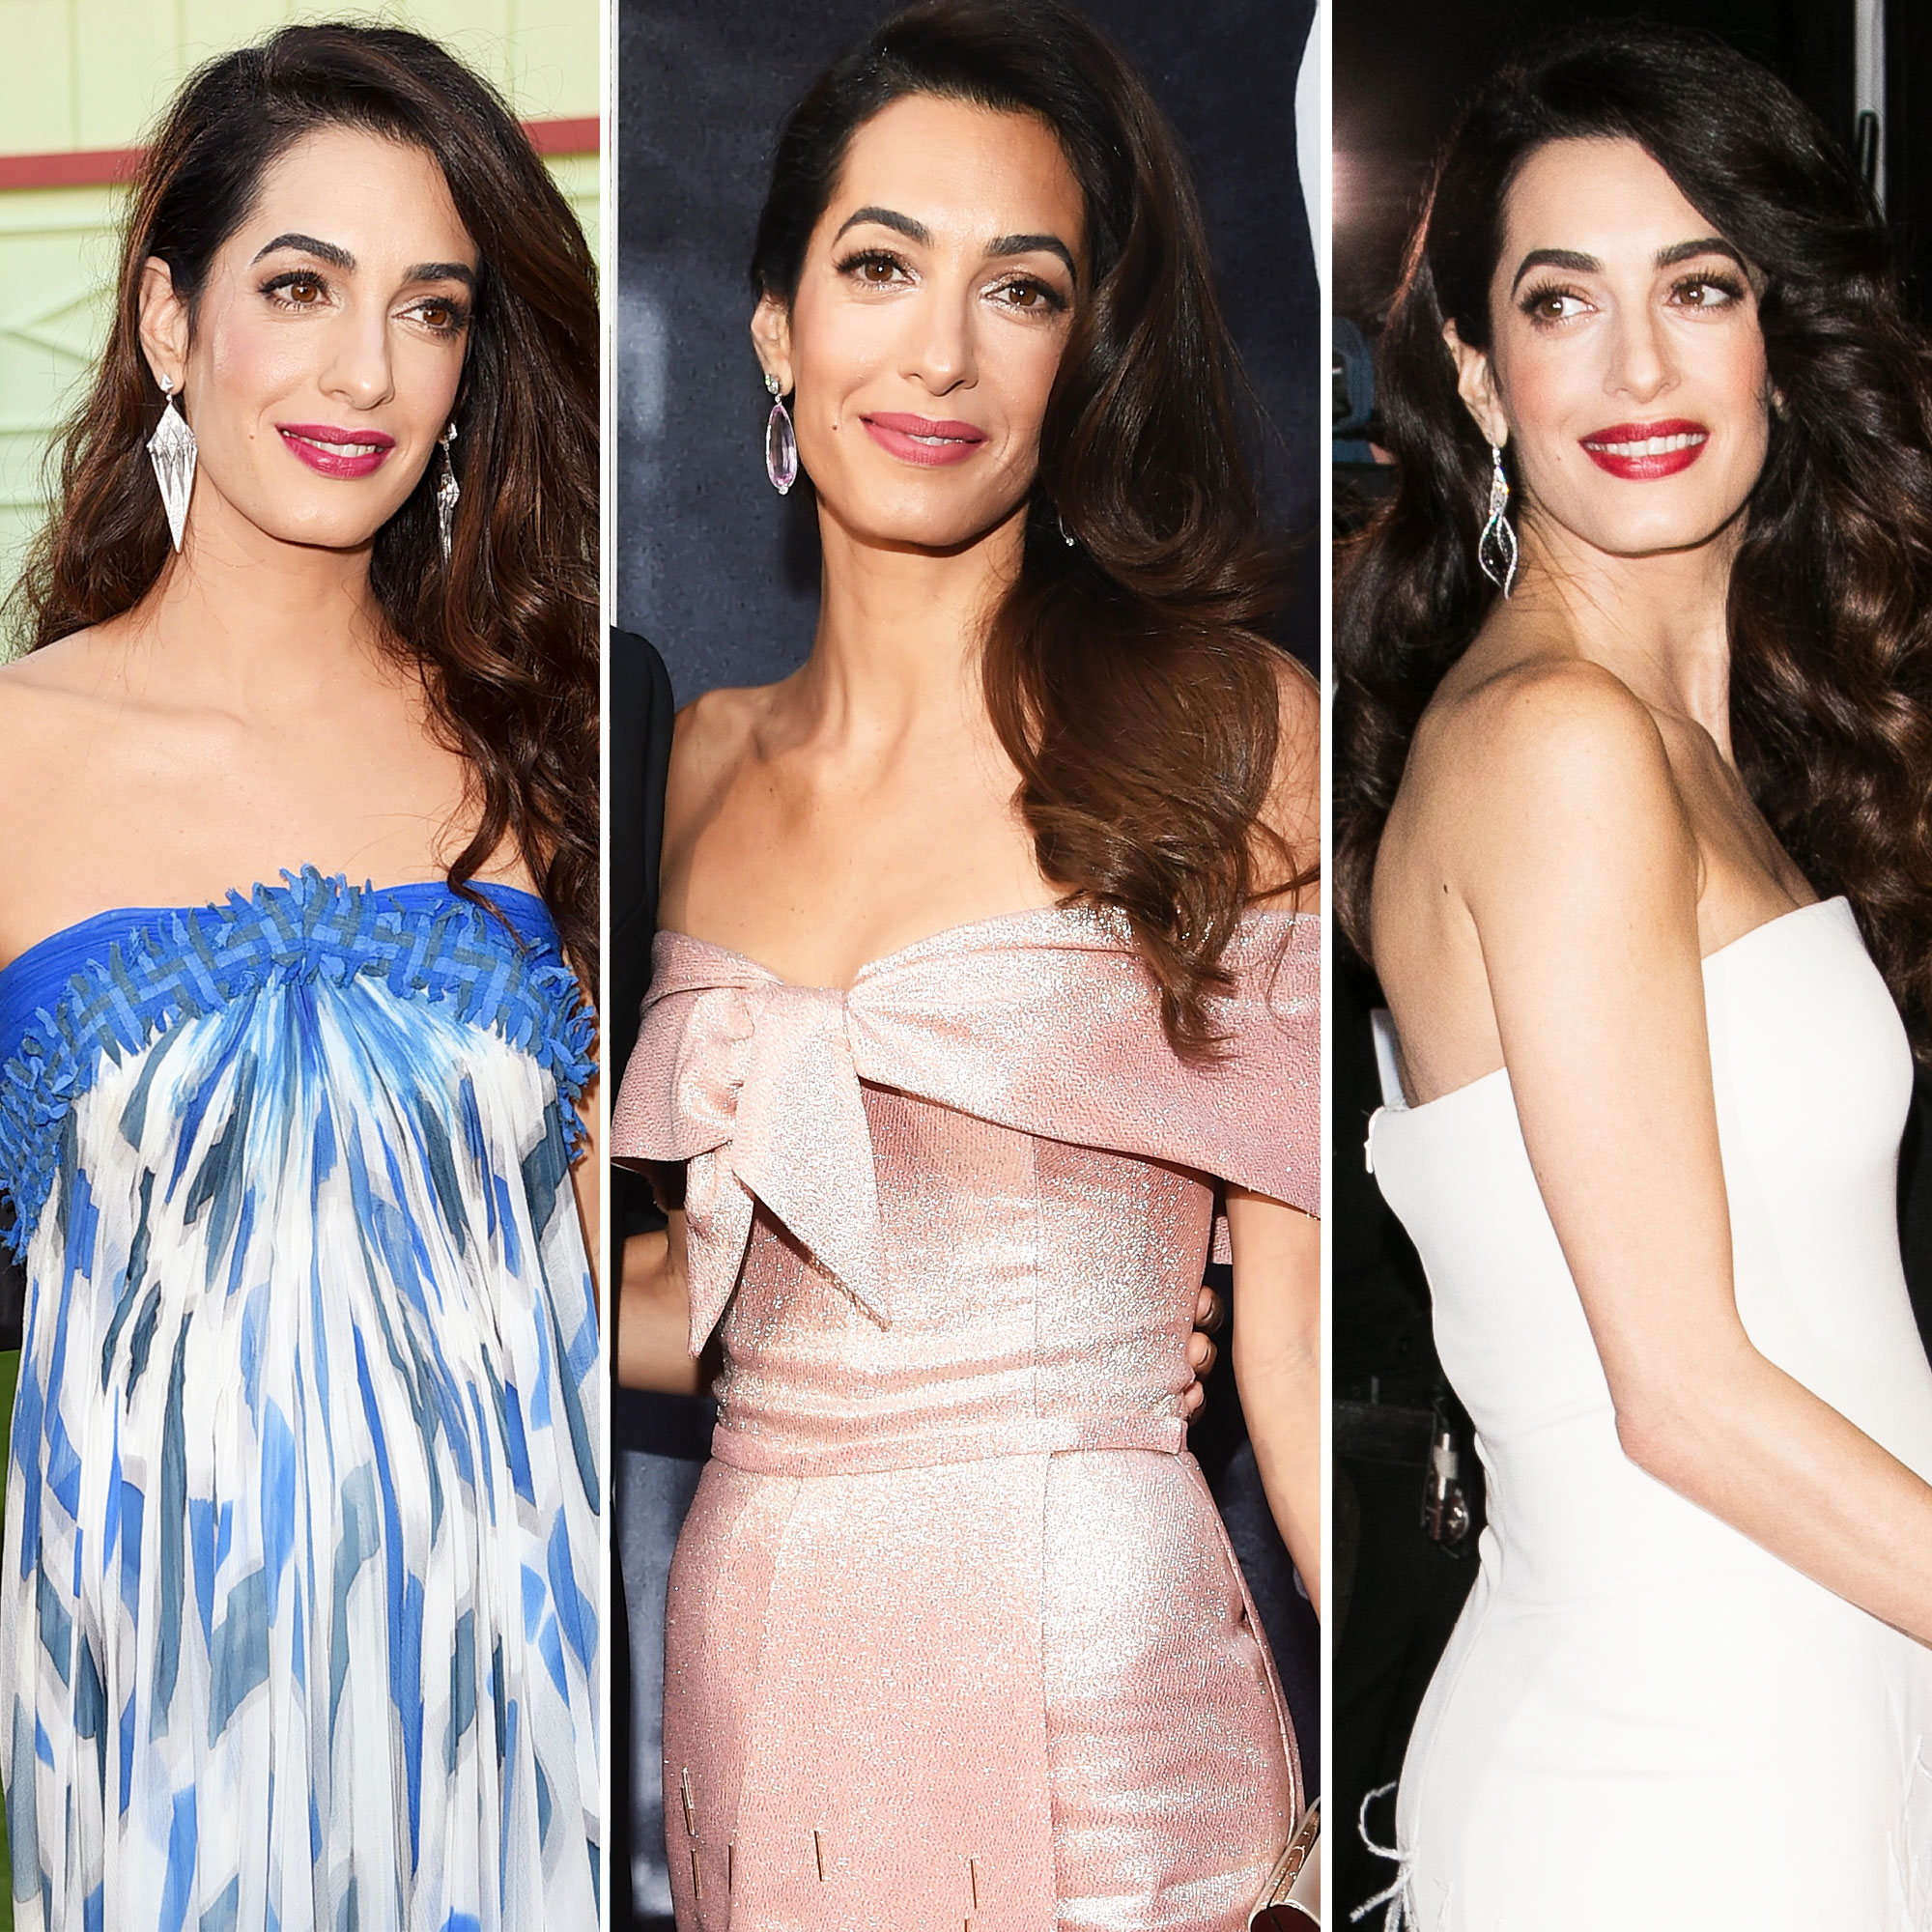 How to Dress Like Amal Clooney in 7 Easy Steps  Red shirt dress, Office  outfits women, Casual office wear